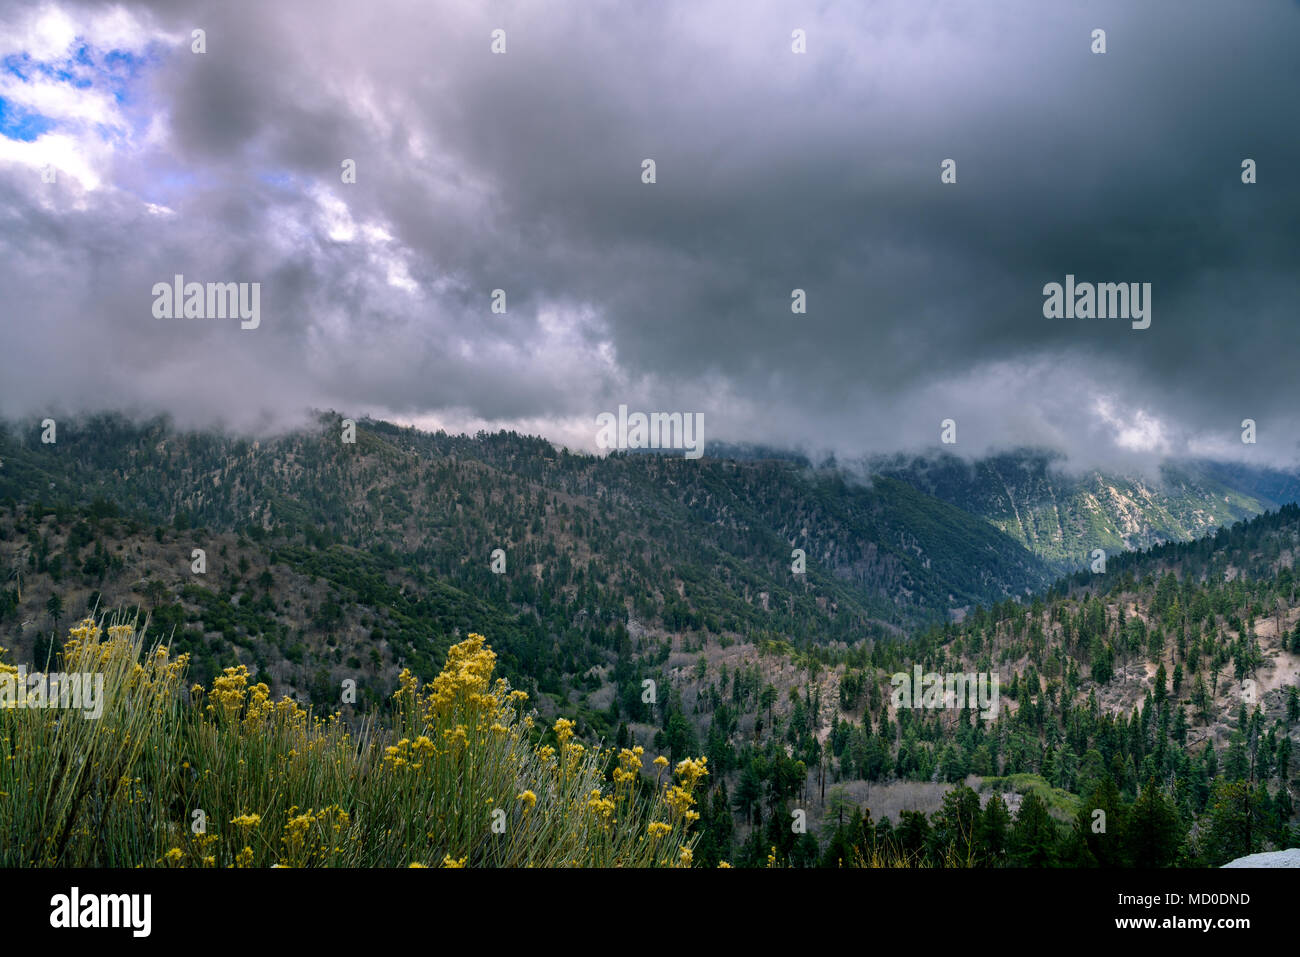 A mountain storm and Fog rolls in over California Mountains Stock Photo